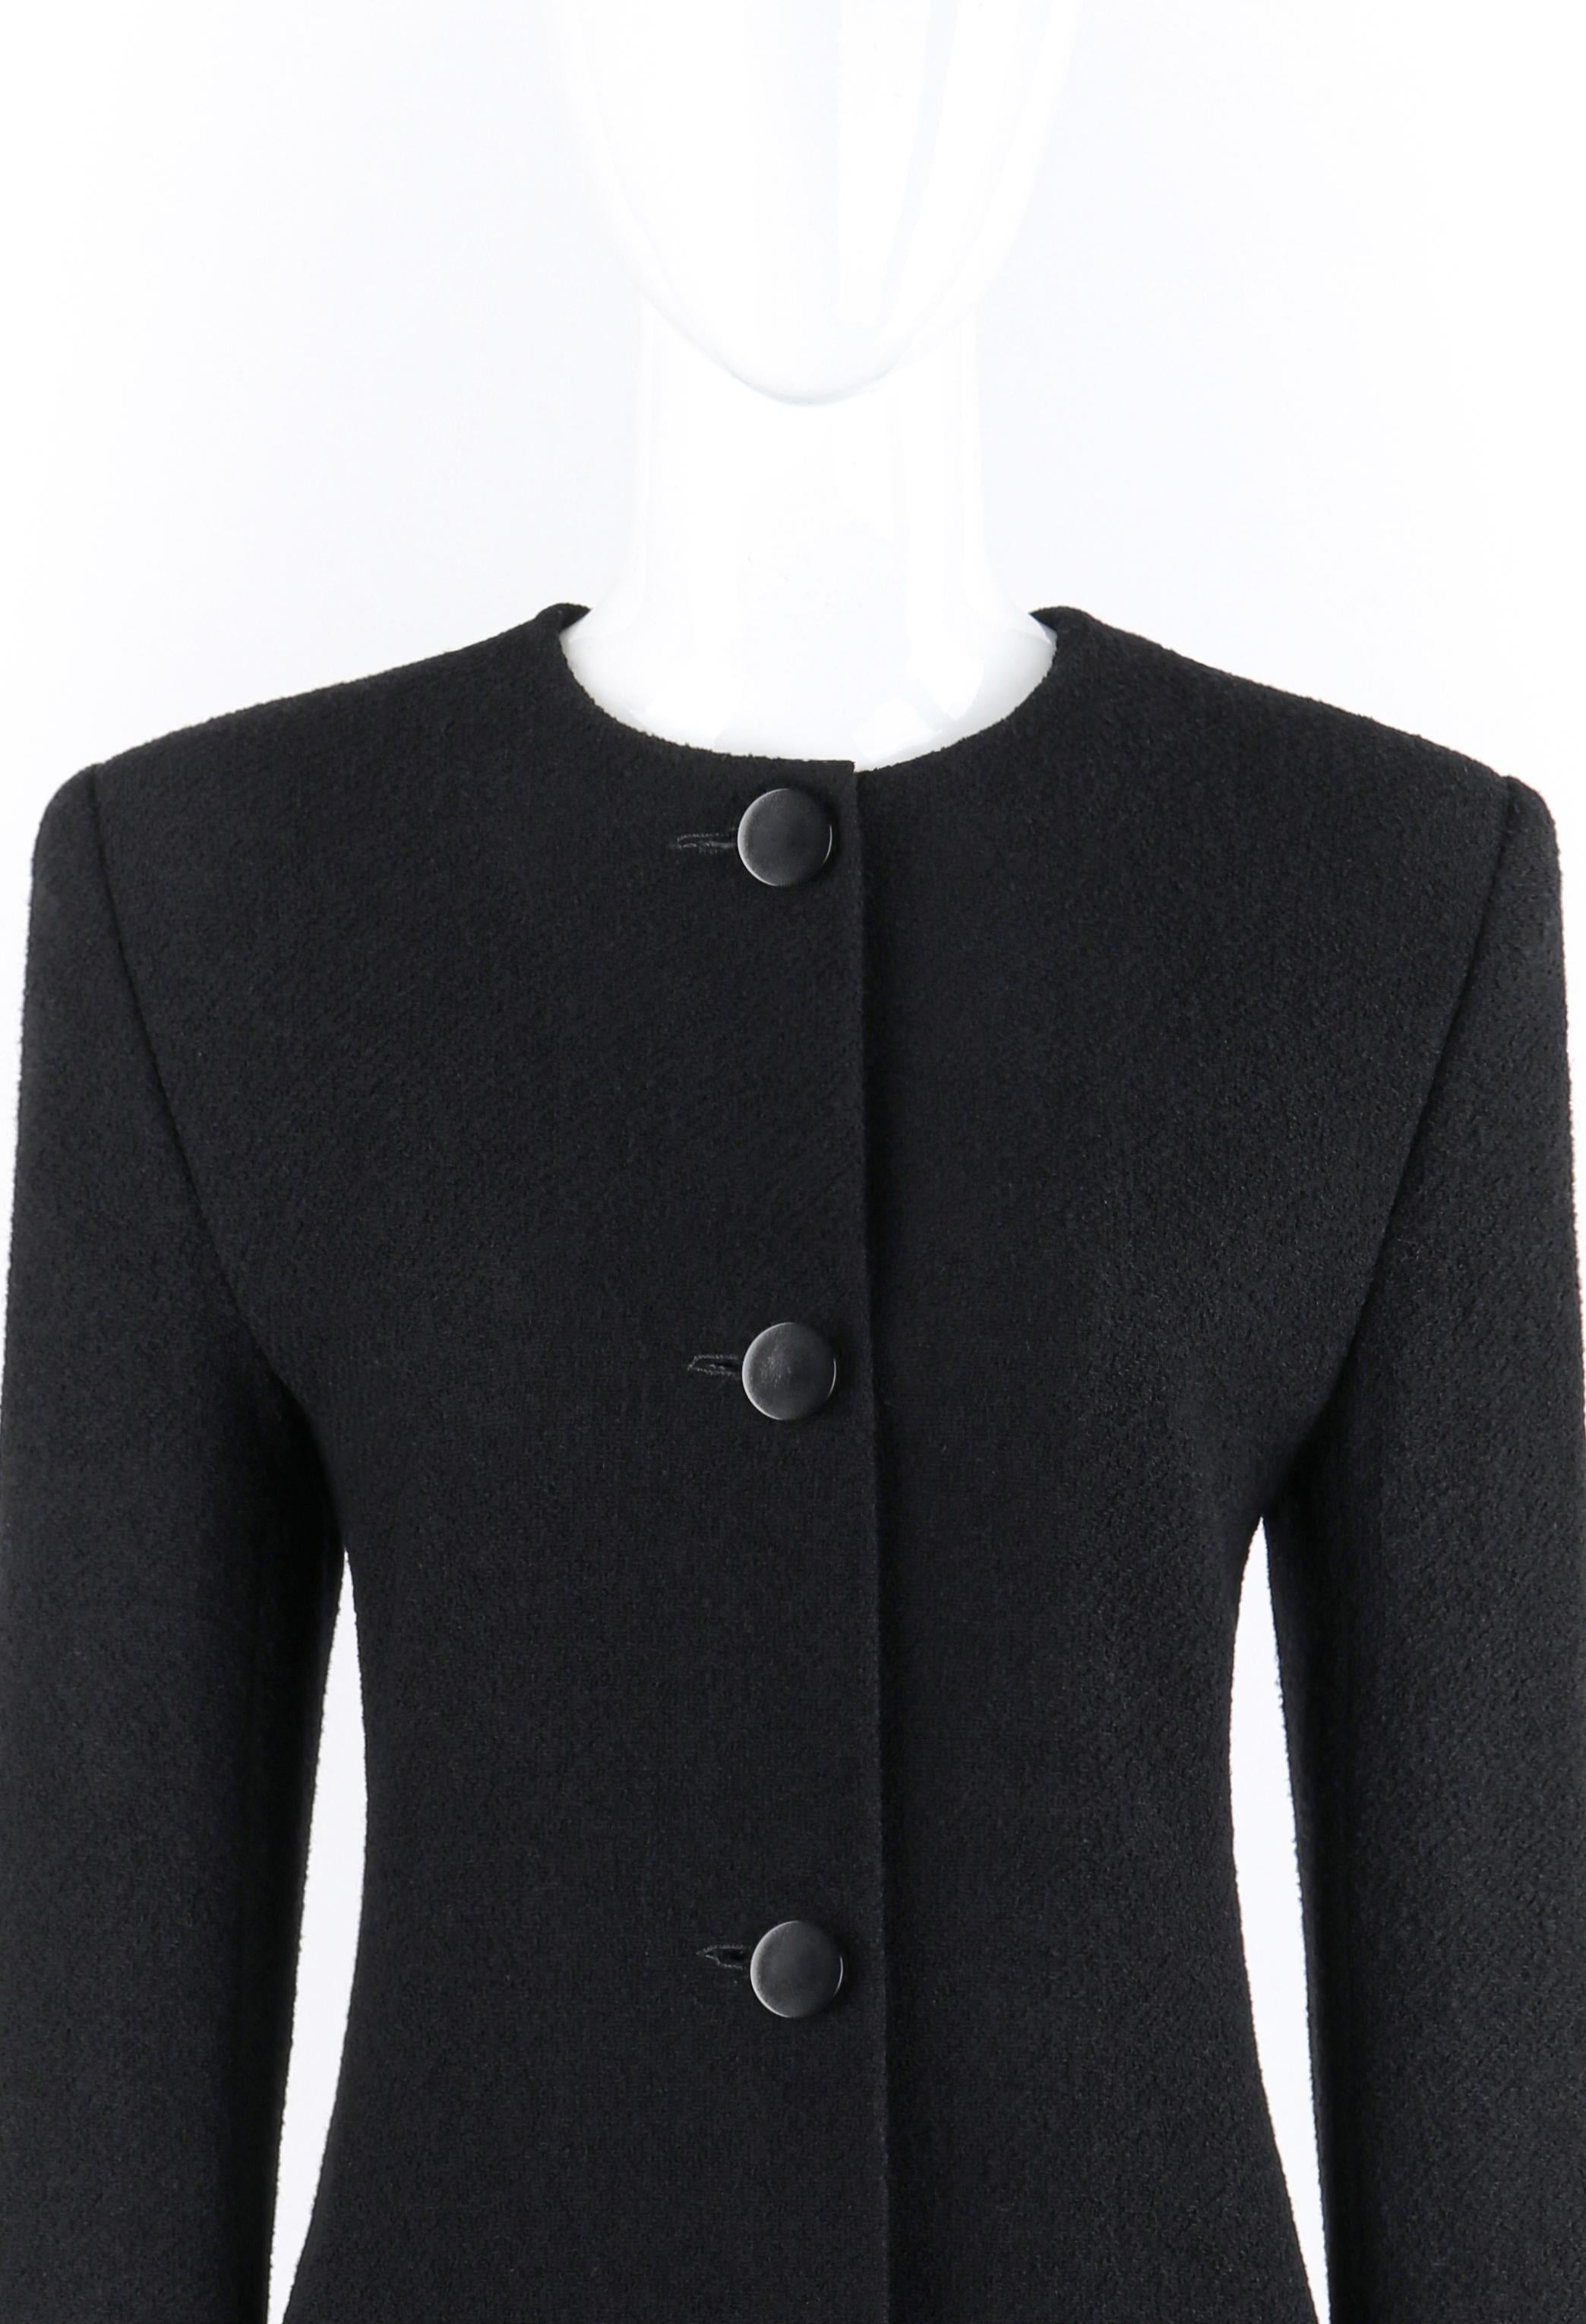 GIVENCHY Couture A/W 1998 ALEXANDER McQUEEN Black Button Up Tailored Coat In Good Condition For Sale In Thiensville, WI